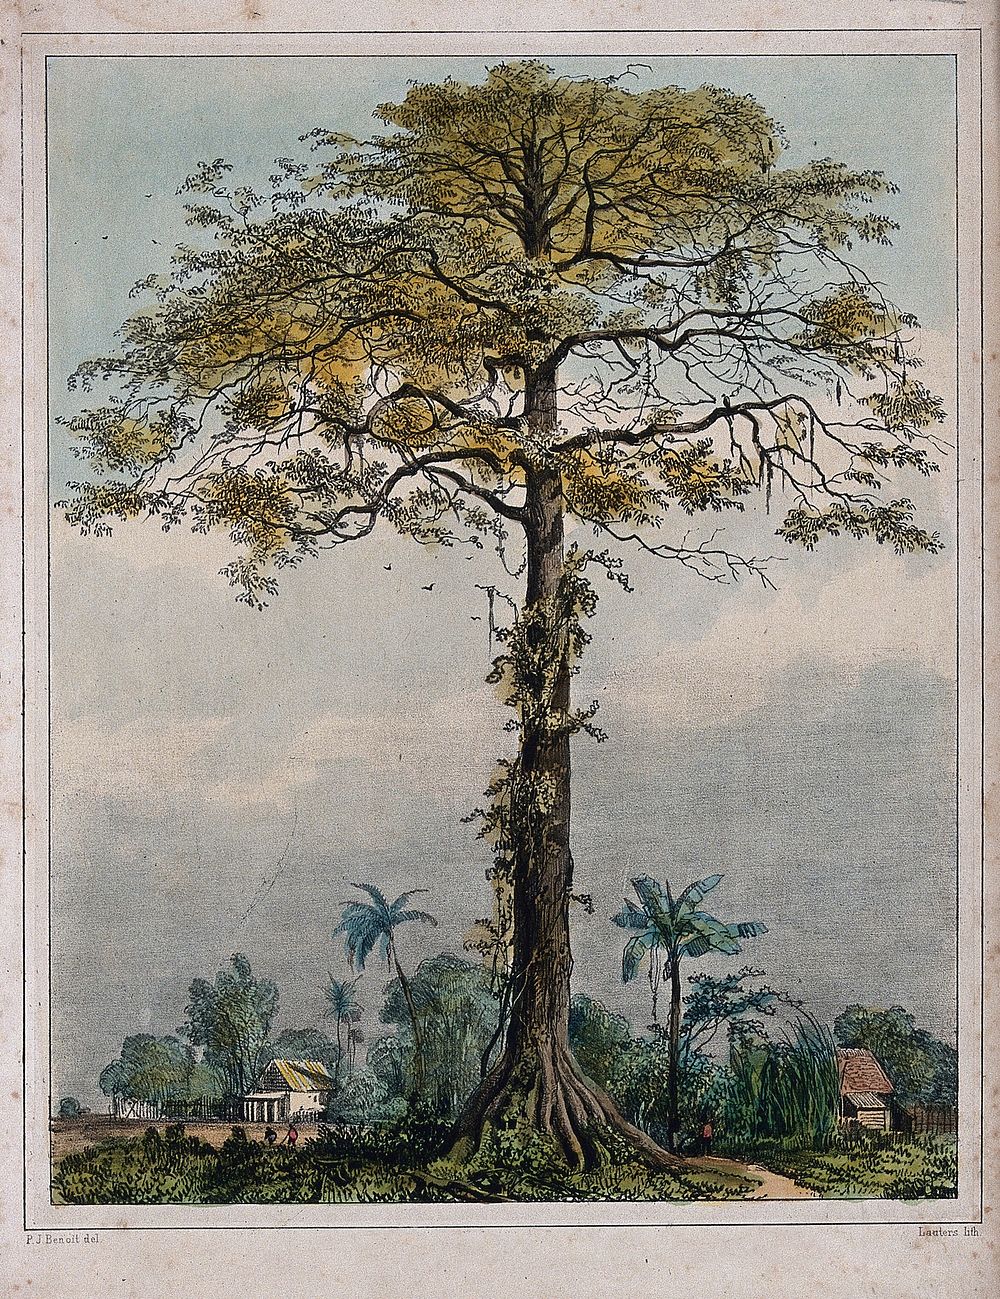 Kapok or silk cotton tree (Ceiba pentandra) growing by a village in Surinam. Coloured lithograph by P. Lauters, c. 1839…